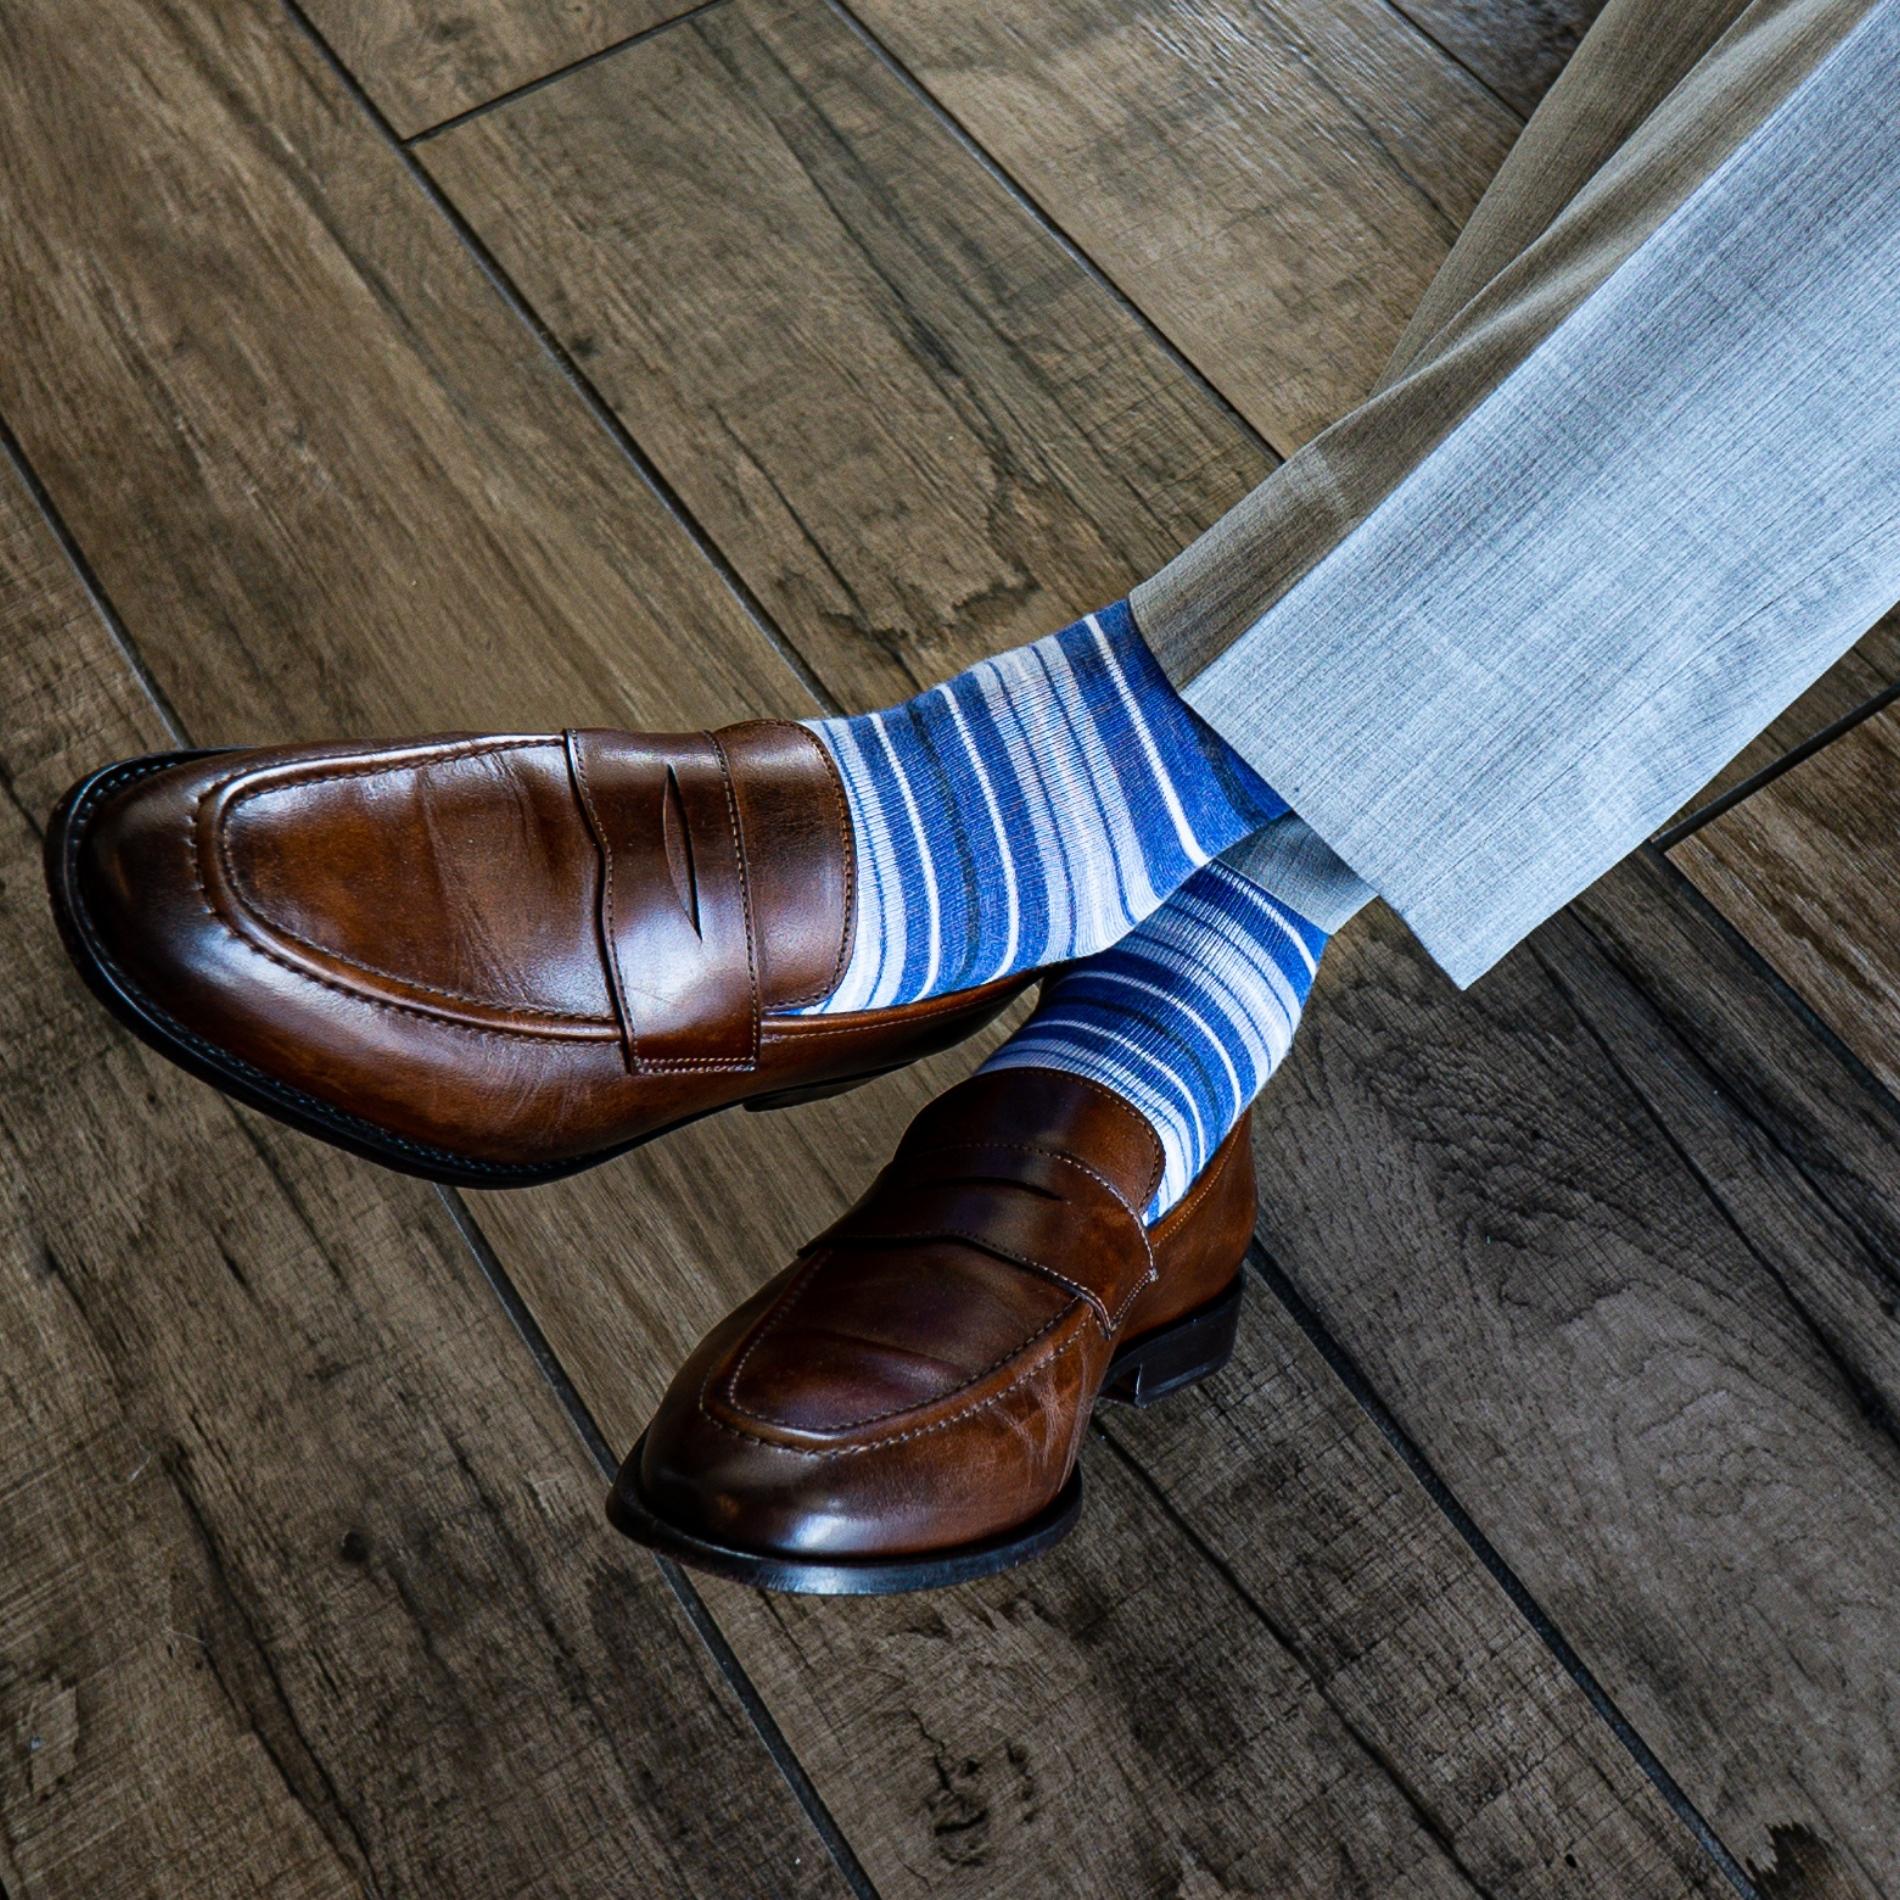 The Stylish Gent's Guide To Wearing Socks And Sandals